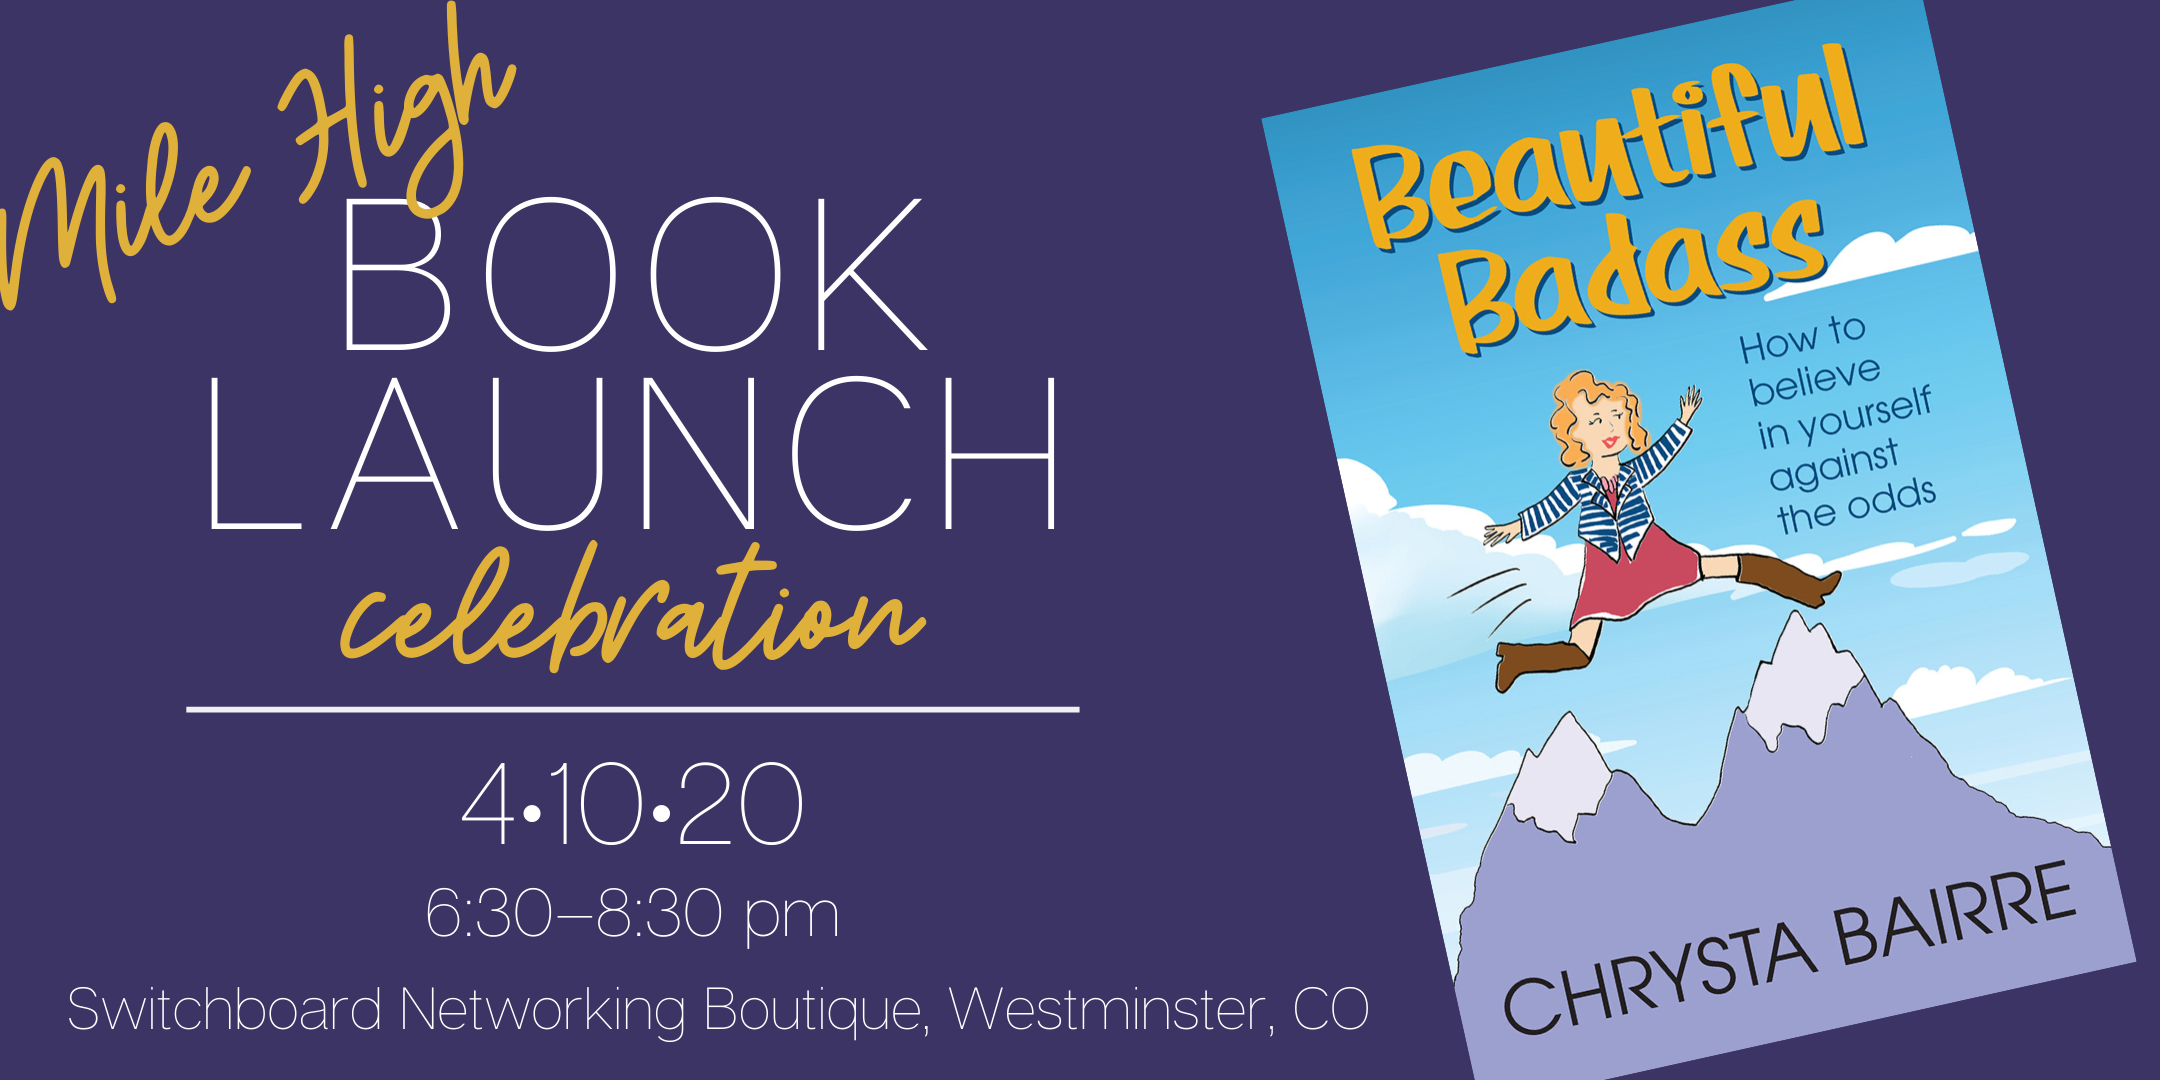 Mile High Beautiful Badass Book Launch Party with author Chrysta Bairre